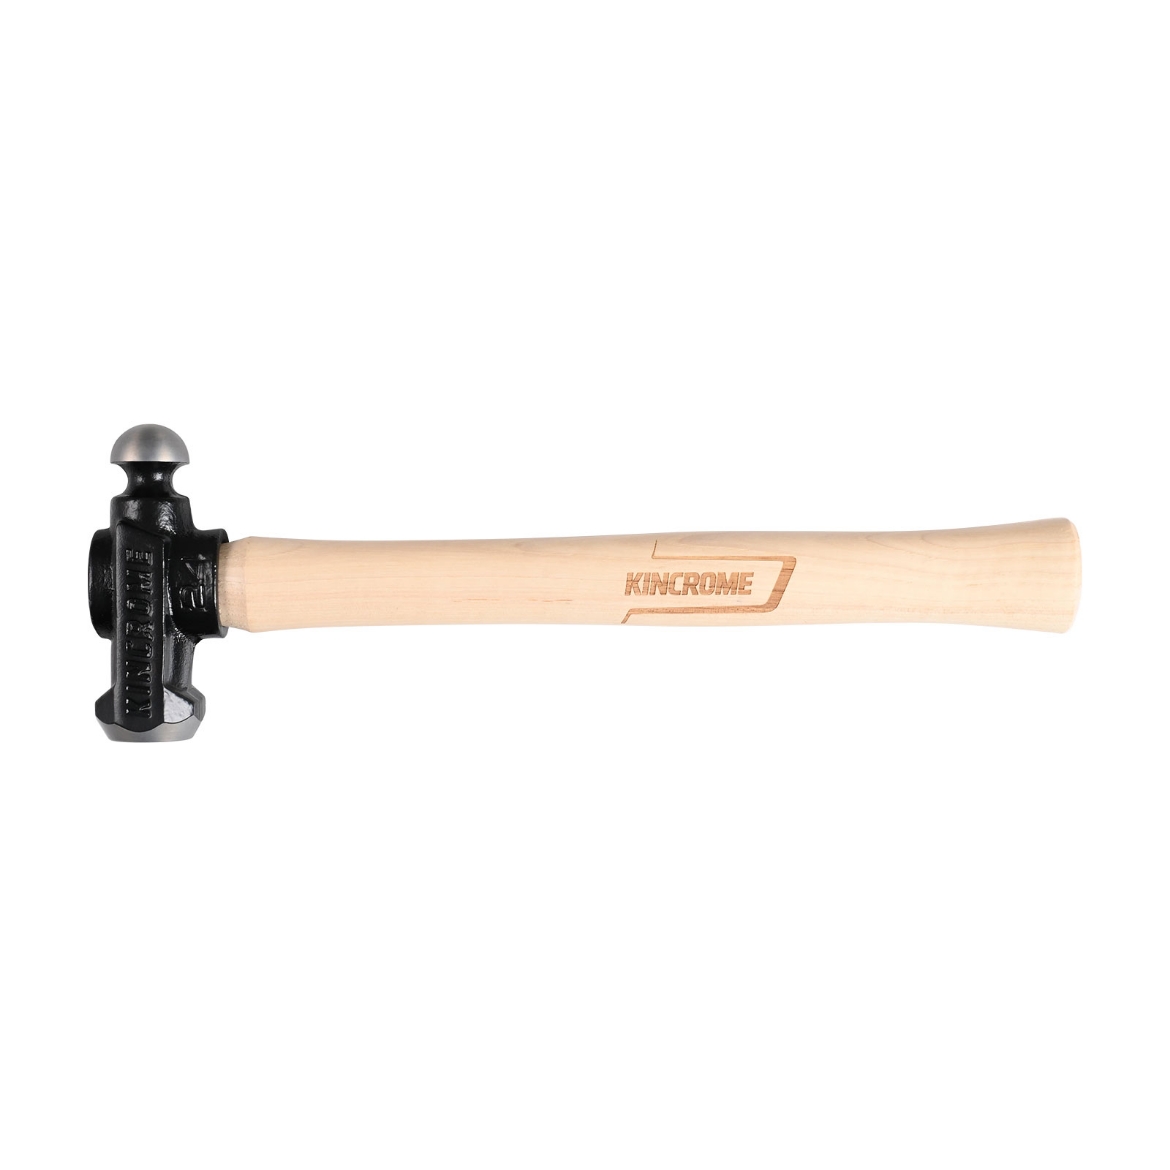 Picture of Ball Pein Hammer 24oz (680g) - Hickory